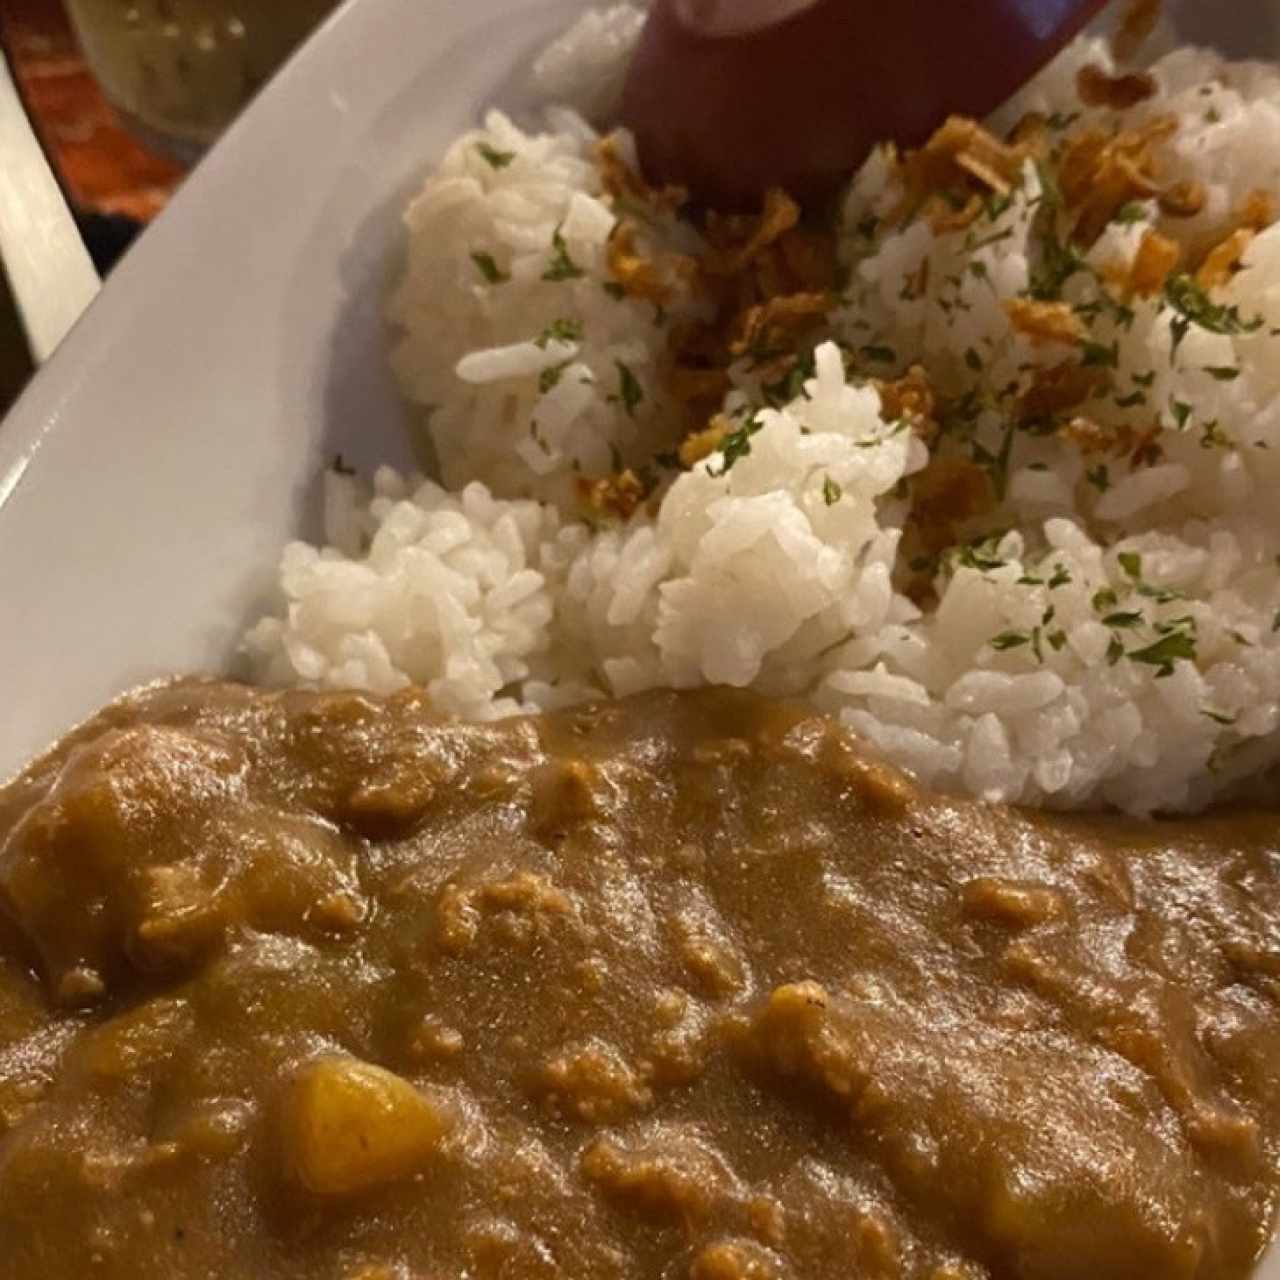 Curry Japones